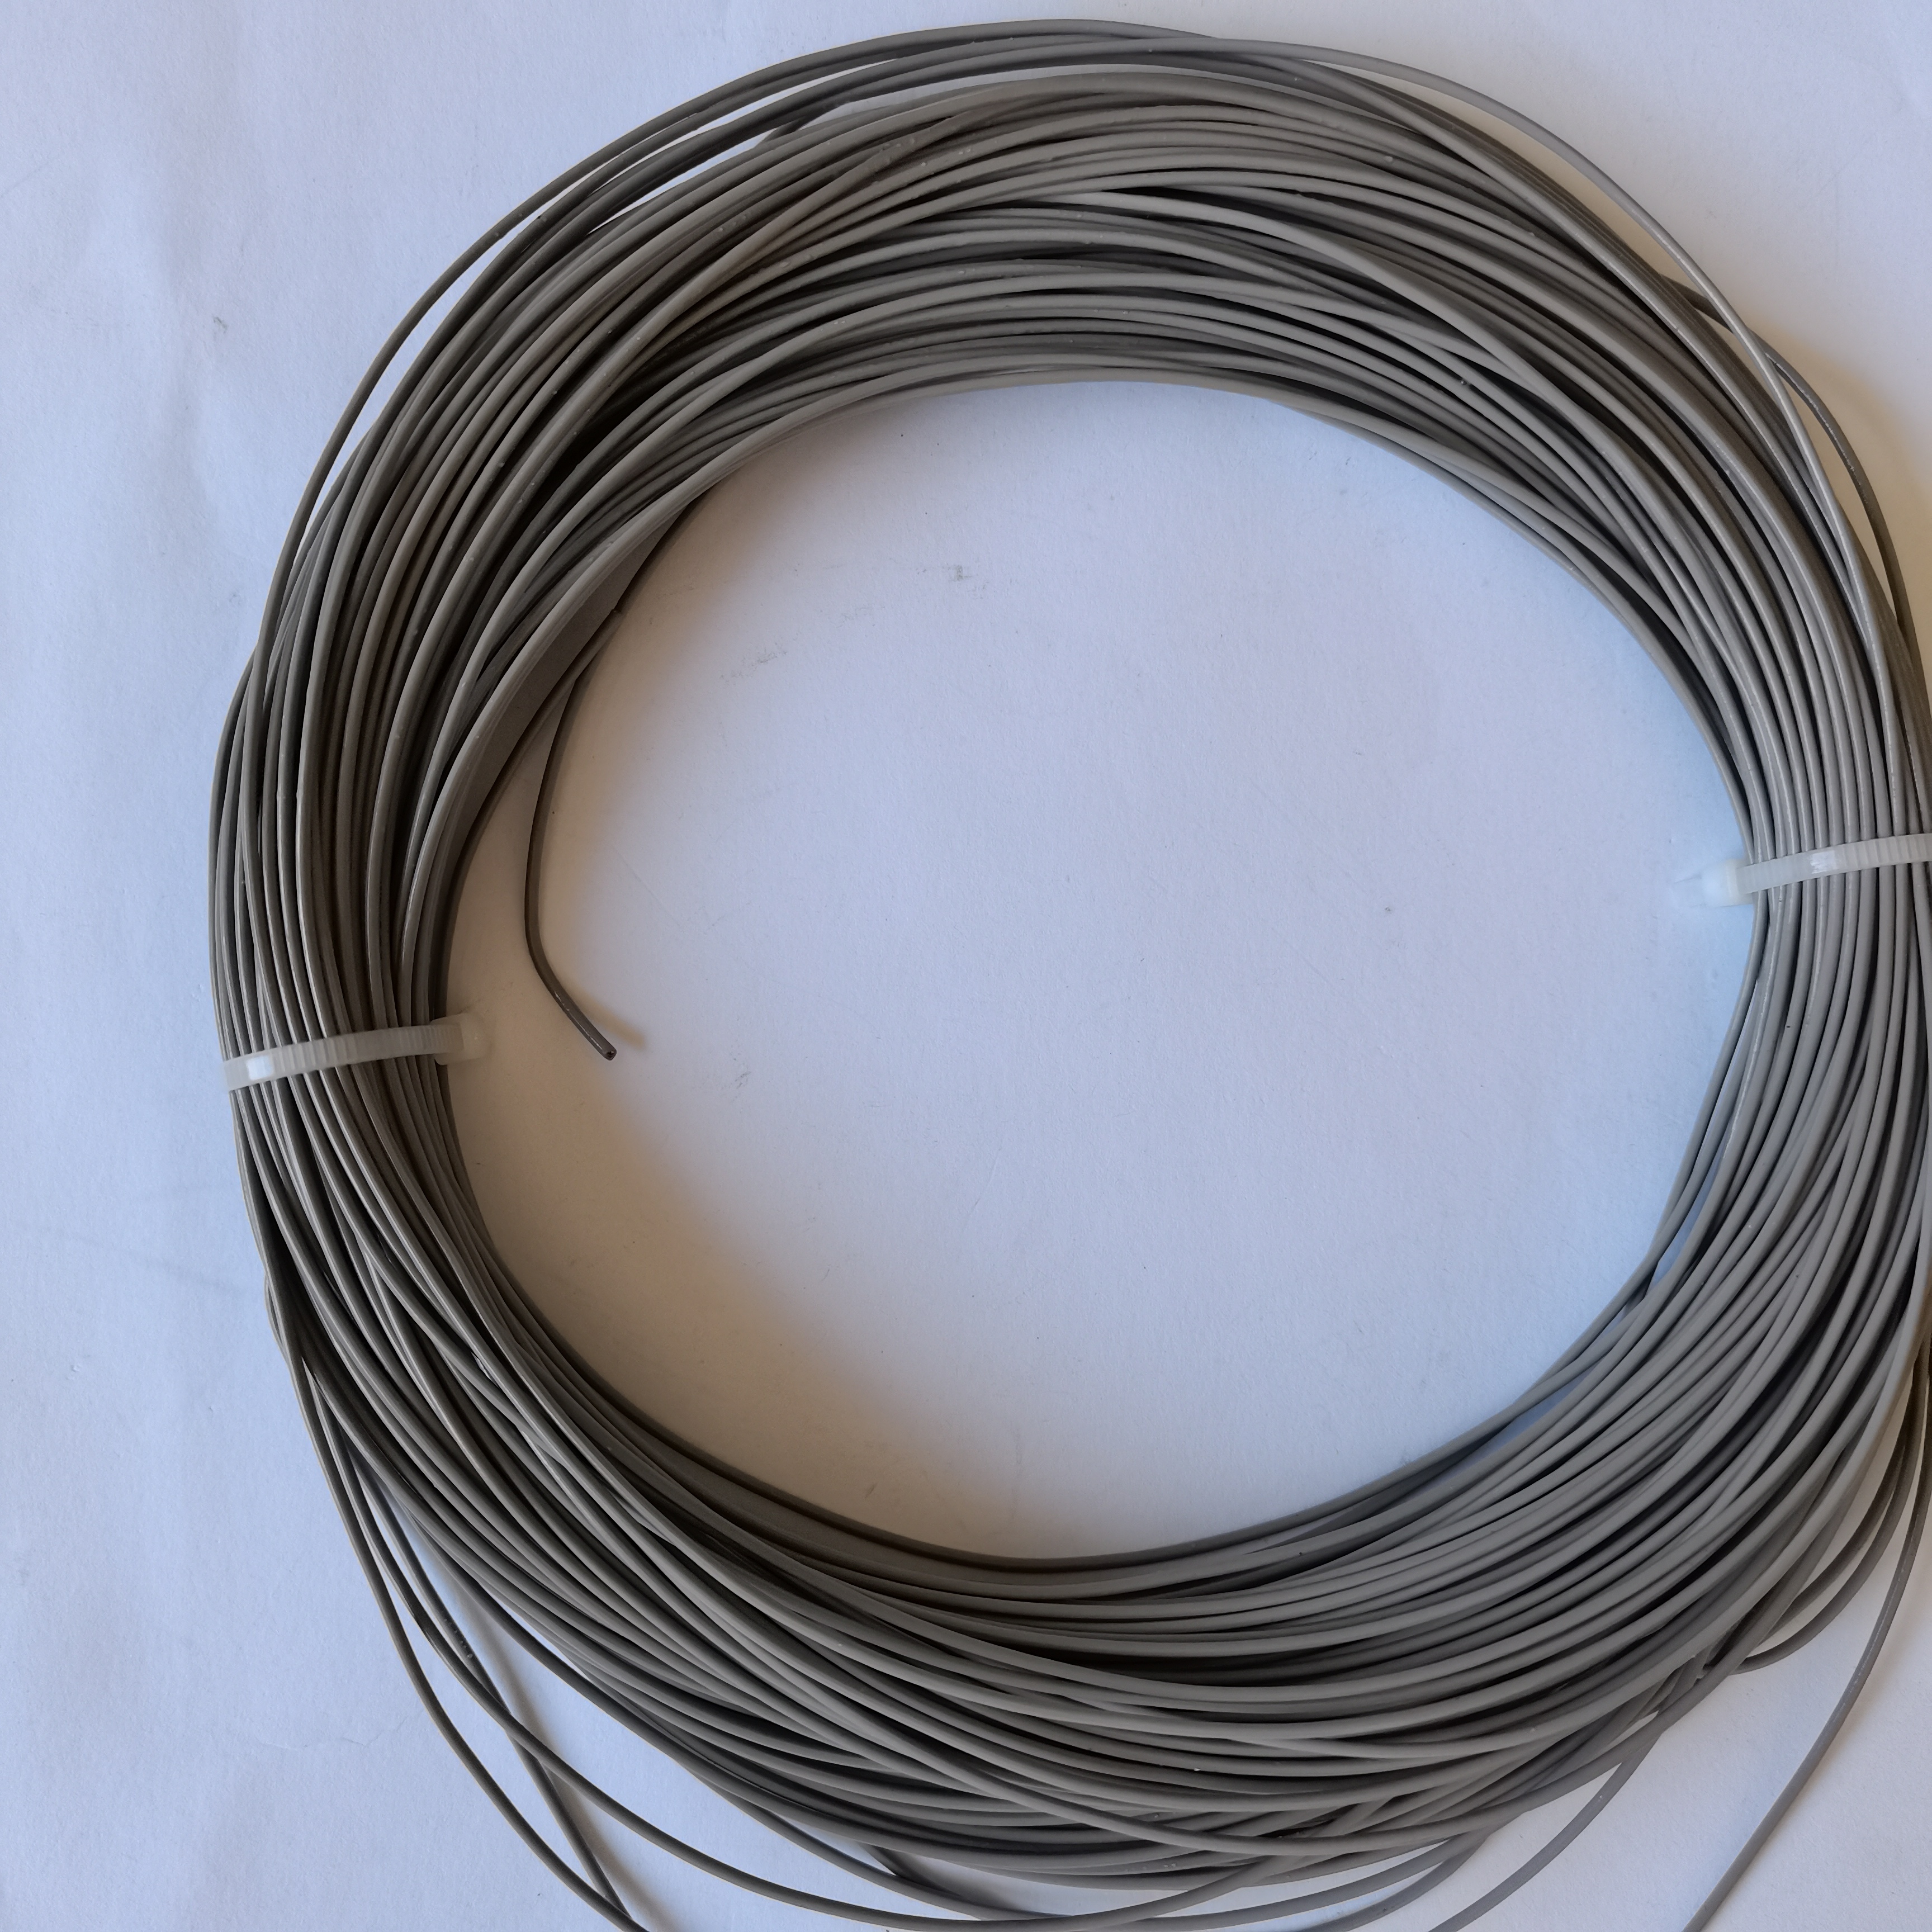 special lighting motor wire cable,srml motor lead rubber wire cable,Motor Pump Winding Cable,High-Temperature Motor Lead Wire